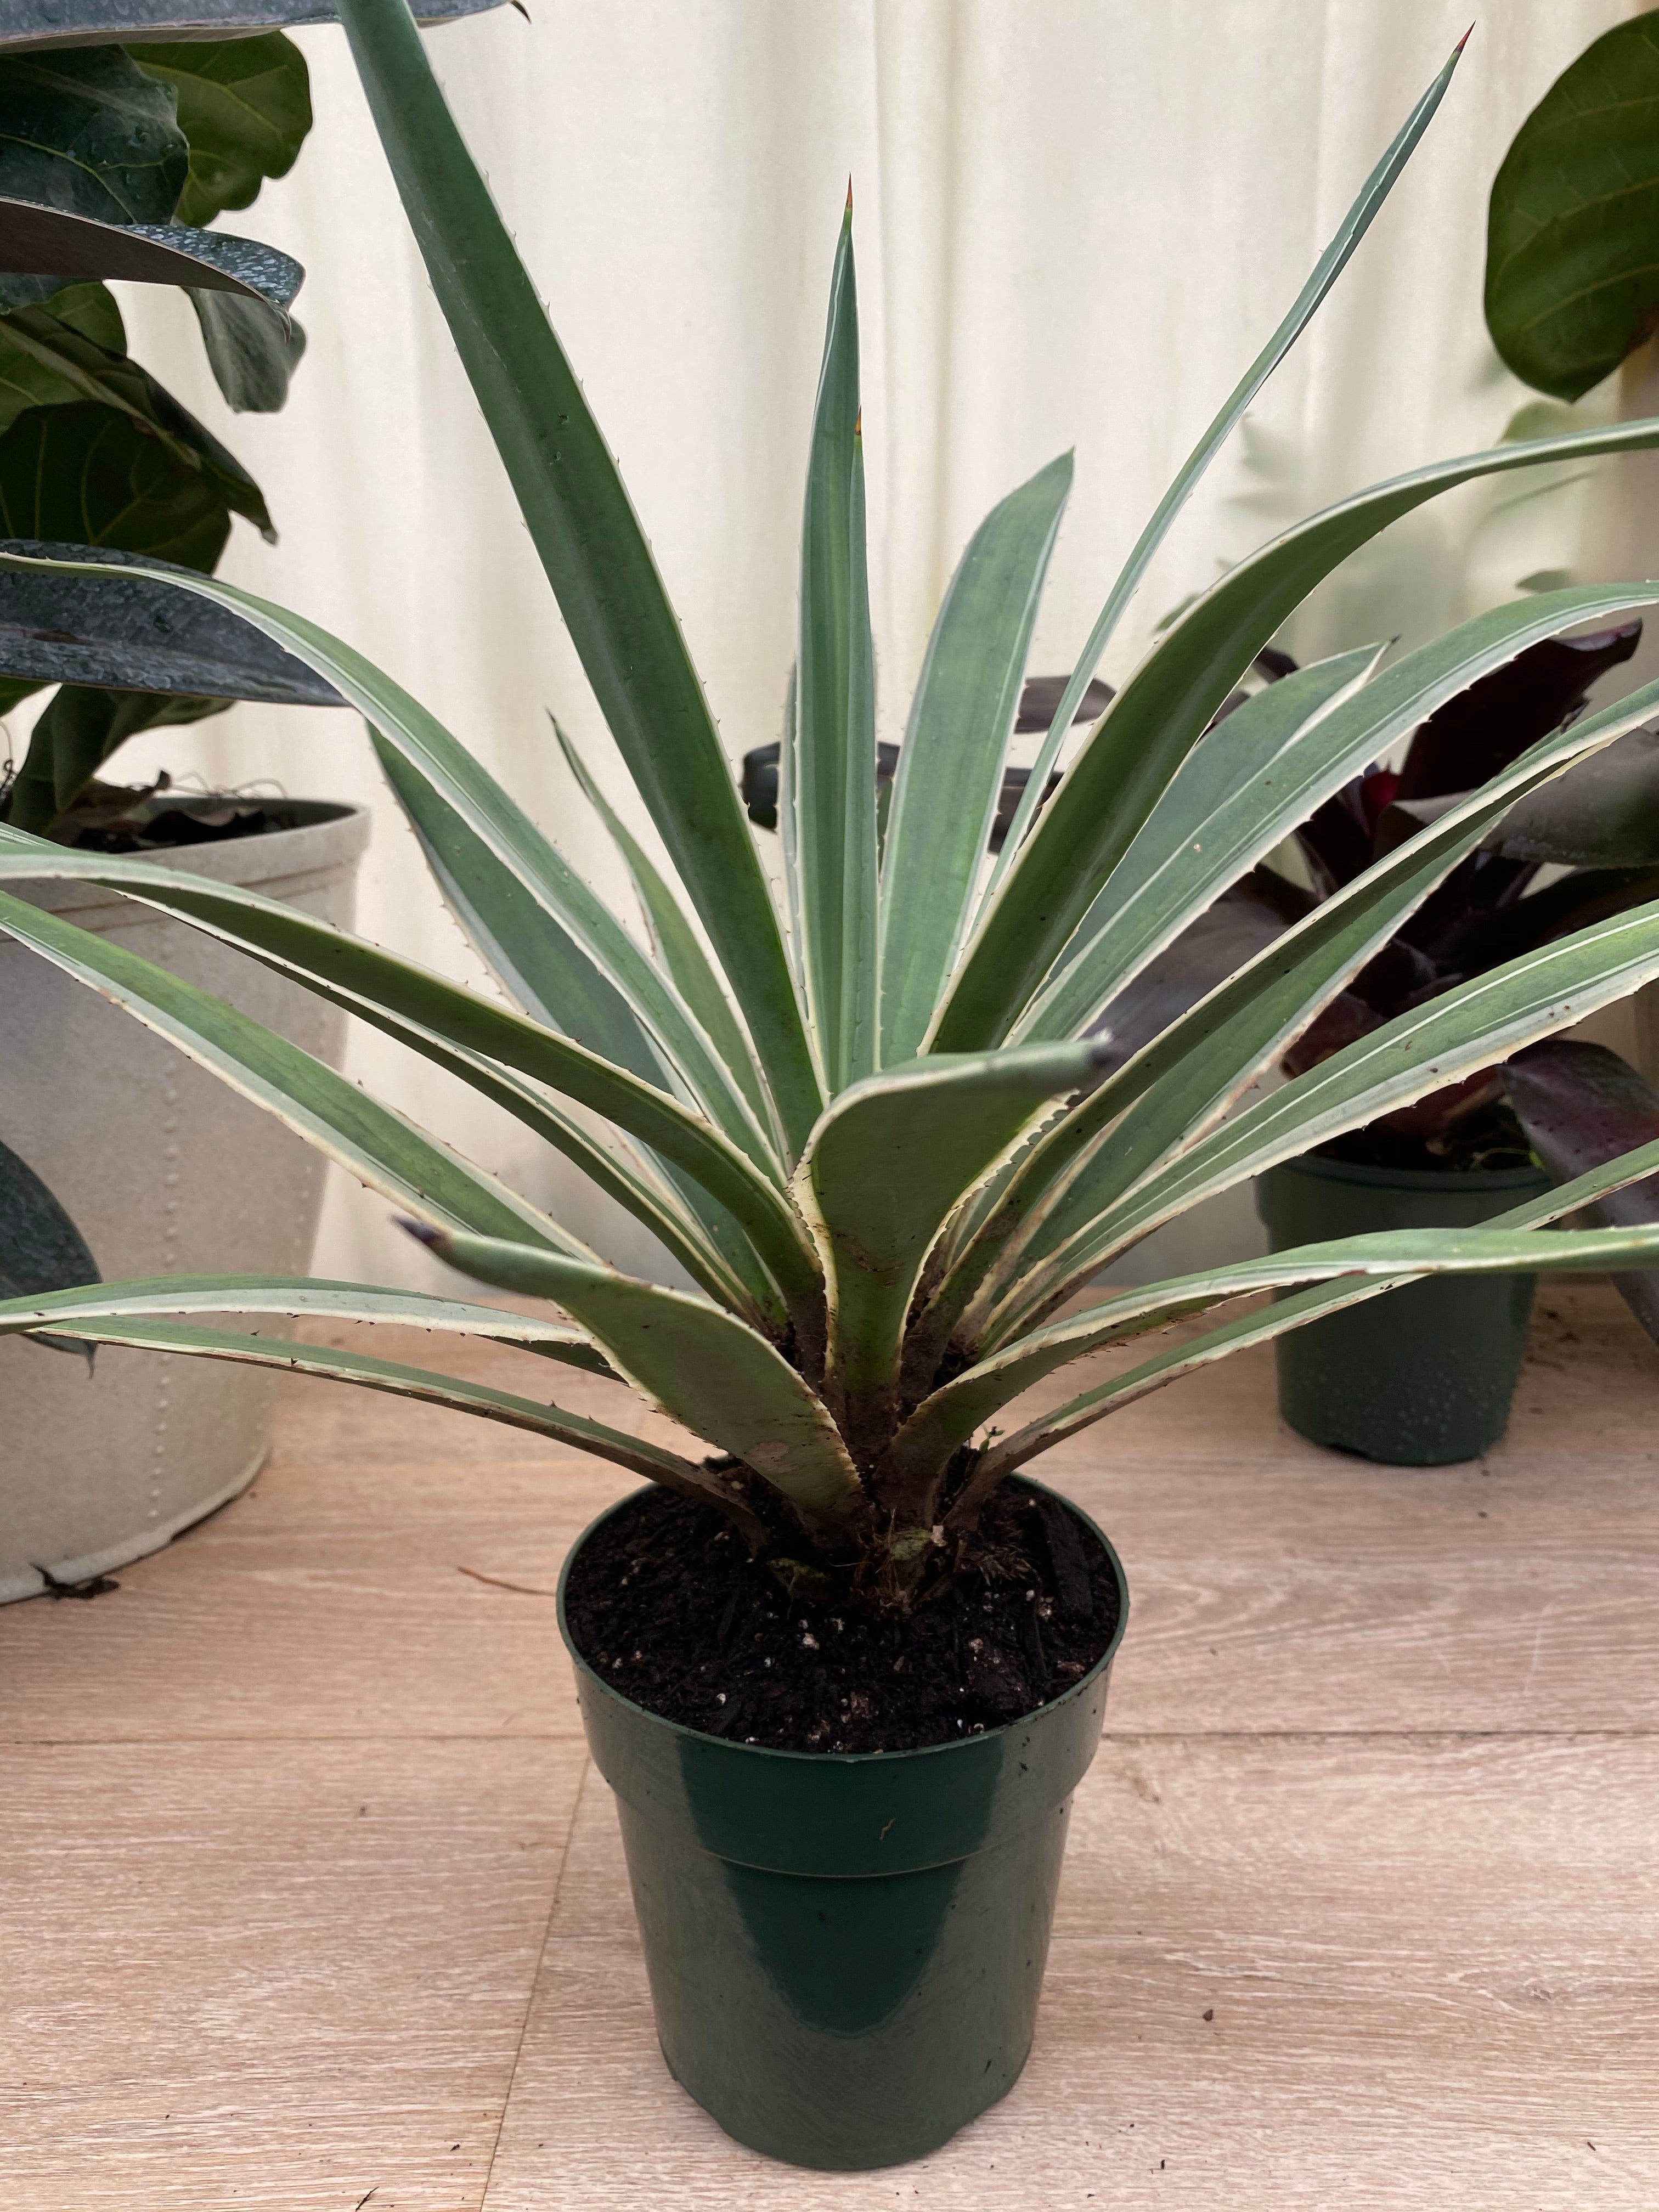 Agave Angustifolia, Caribbean Agave in a pot